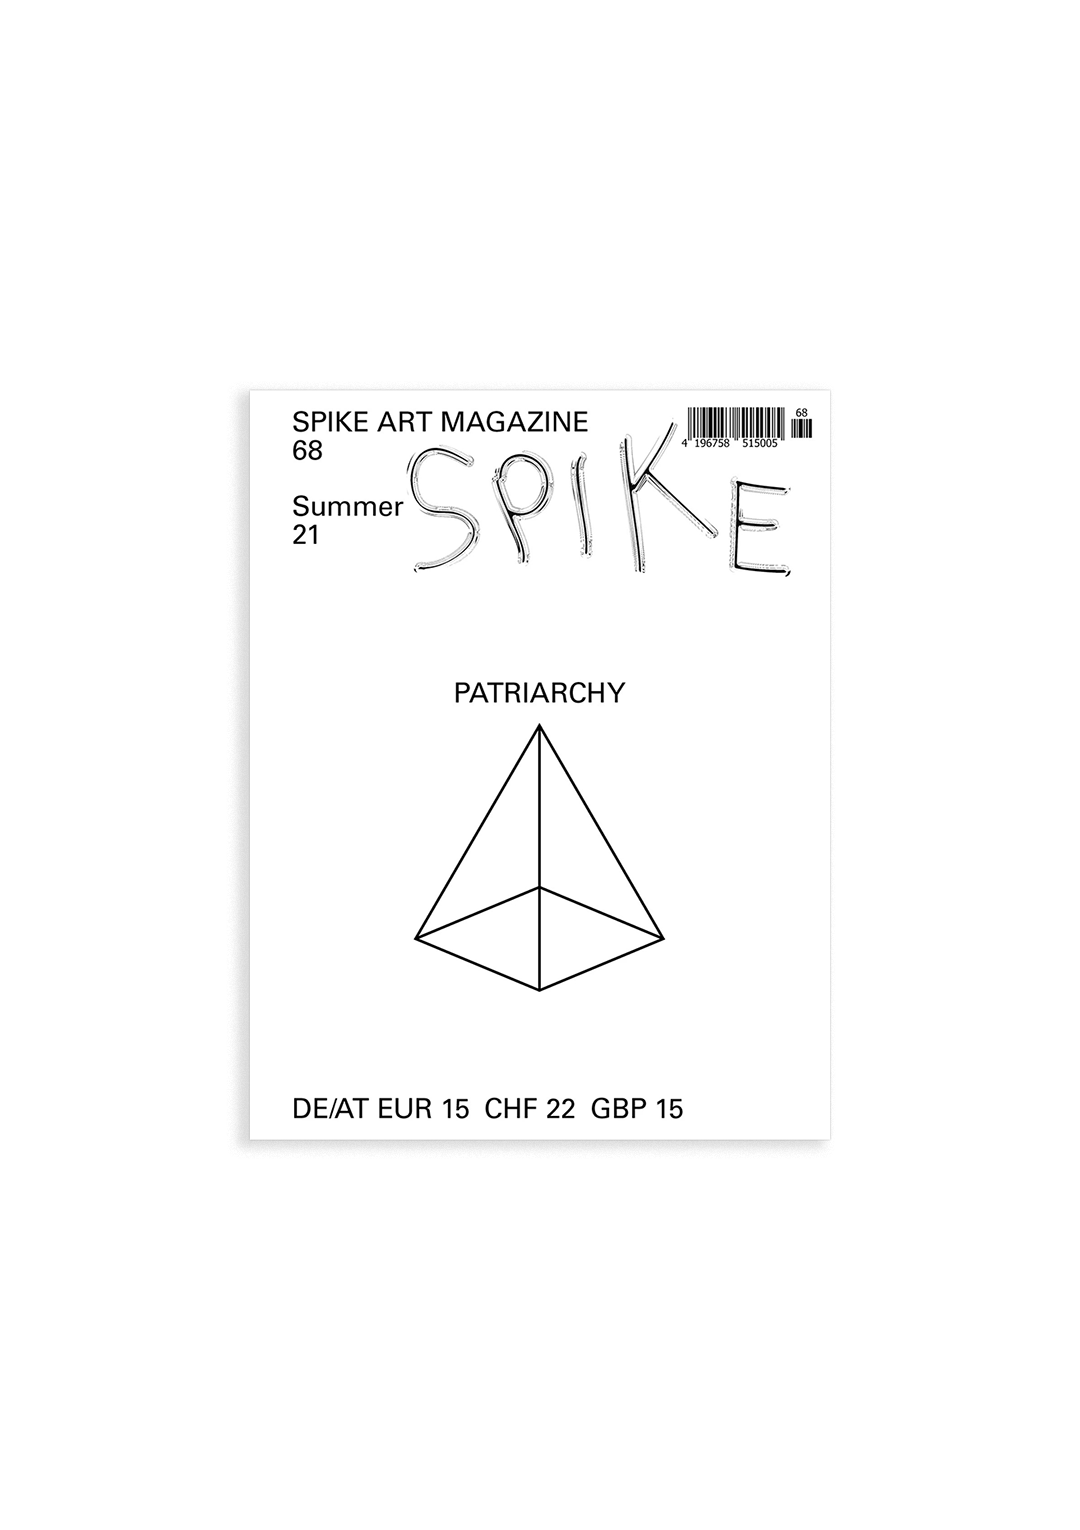 SPIKE ISSUE 68 (SUMMER 2021): PATRIARCHY